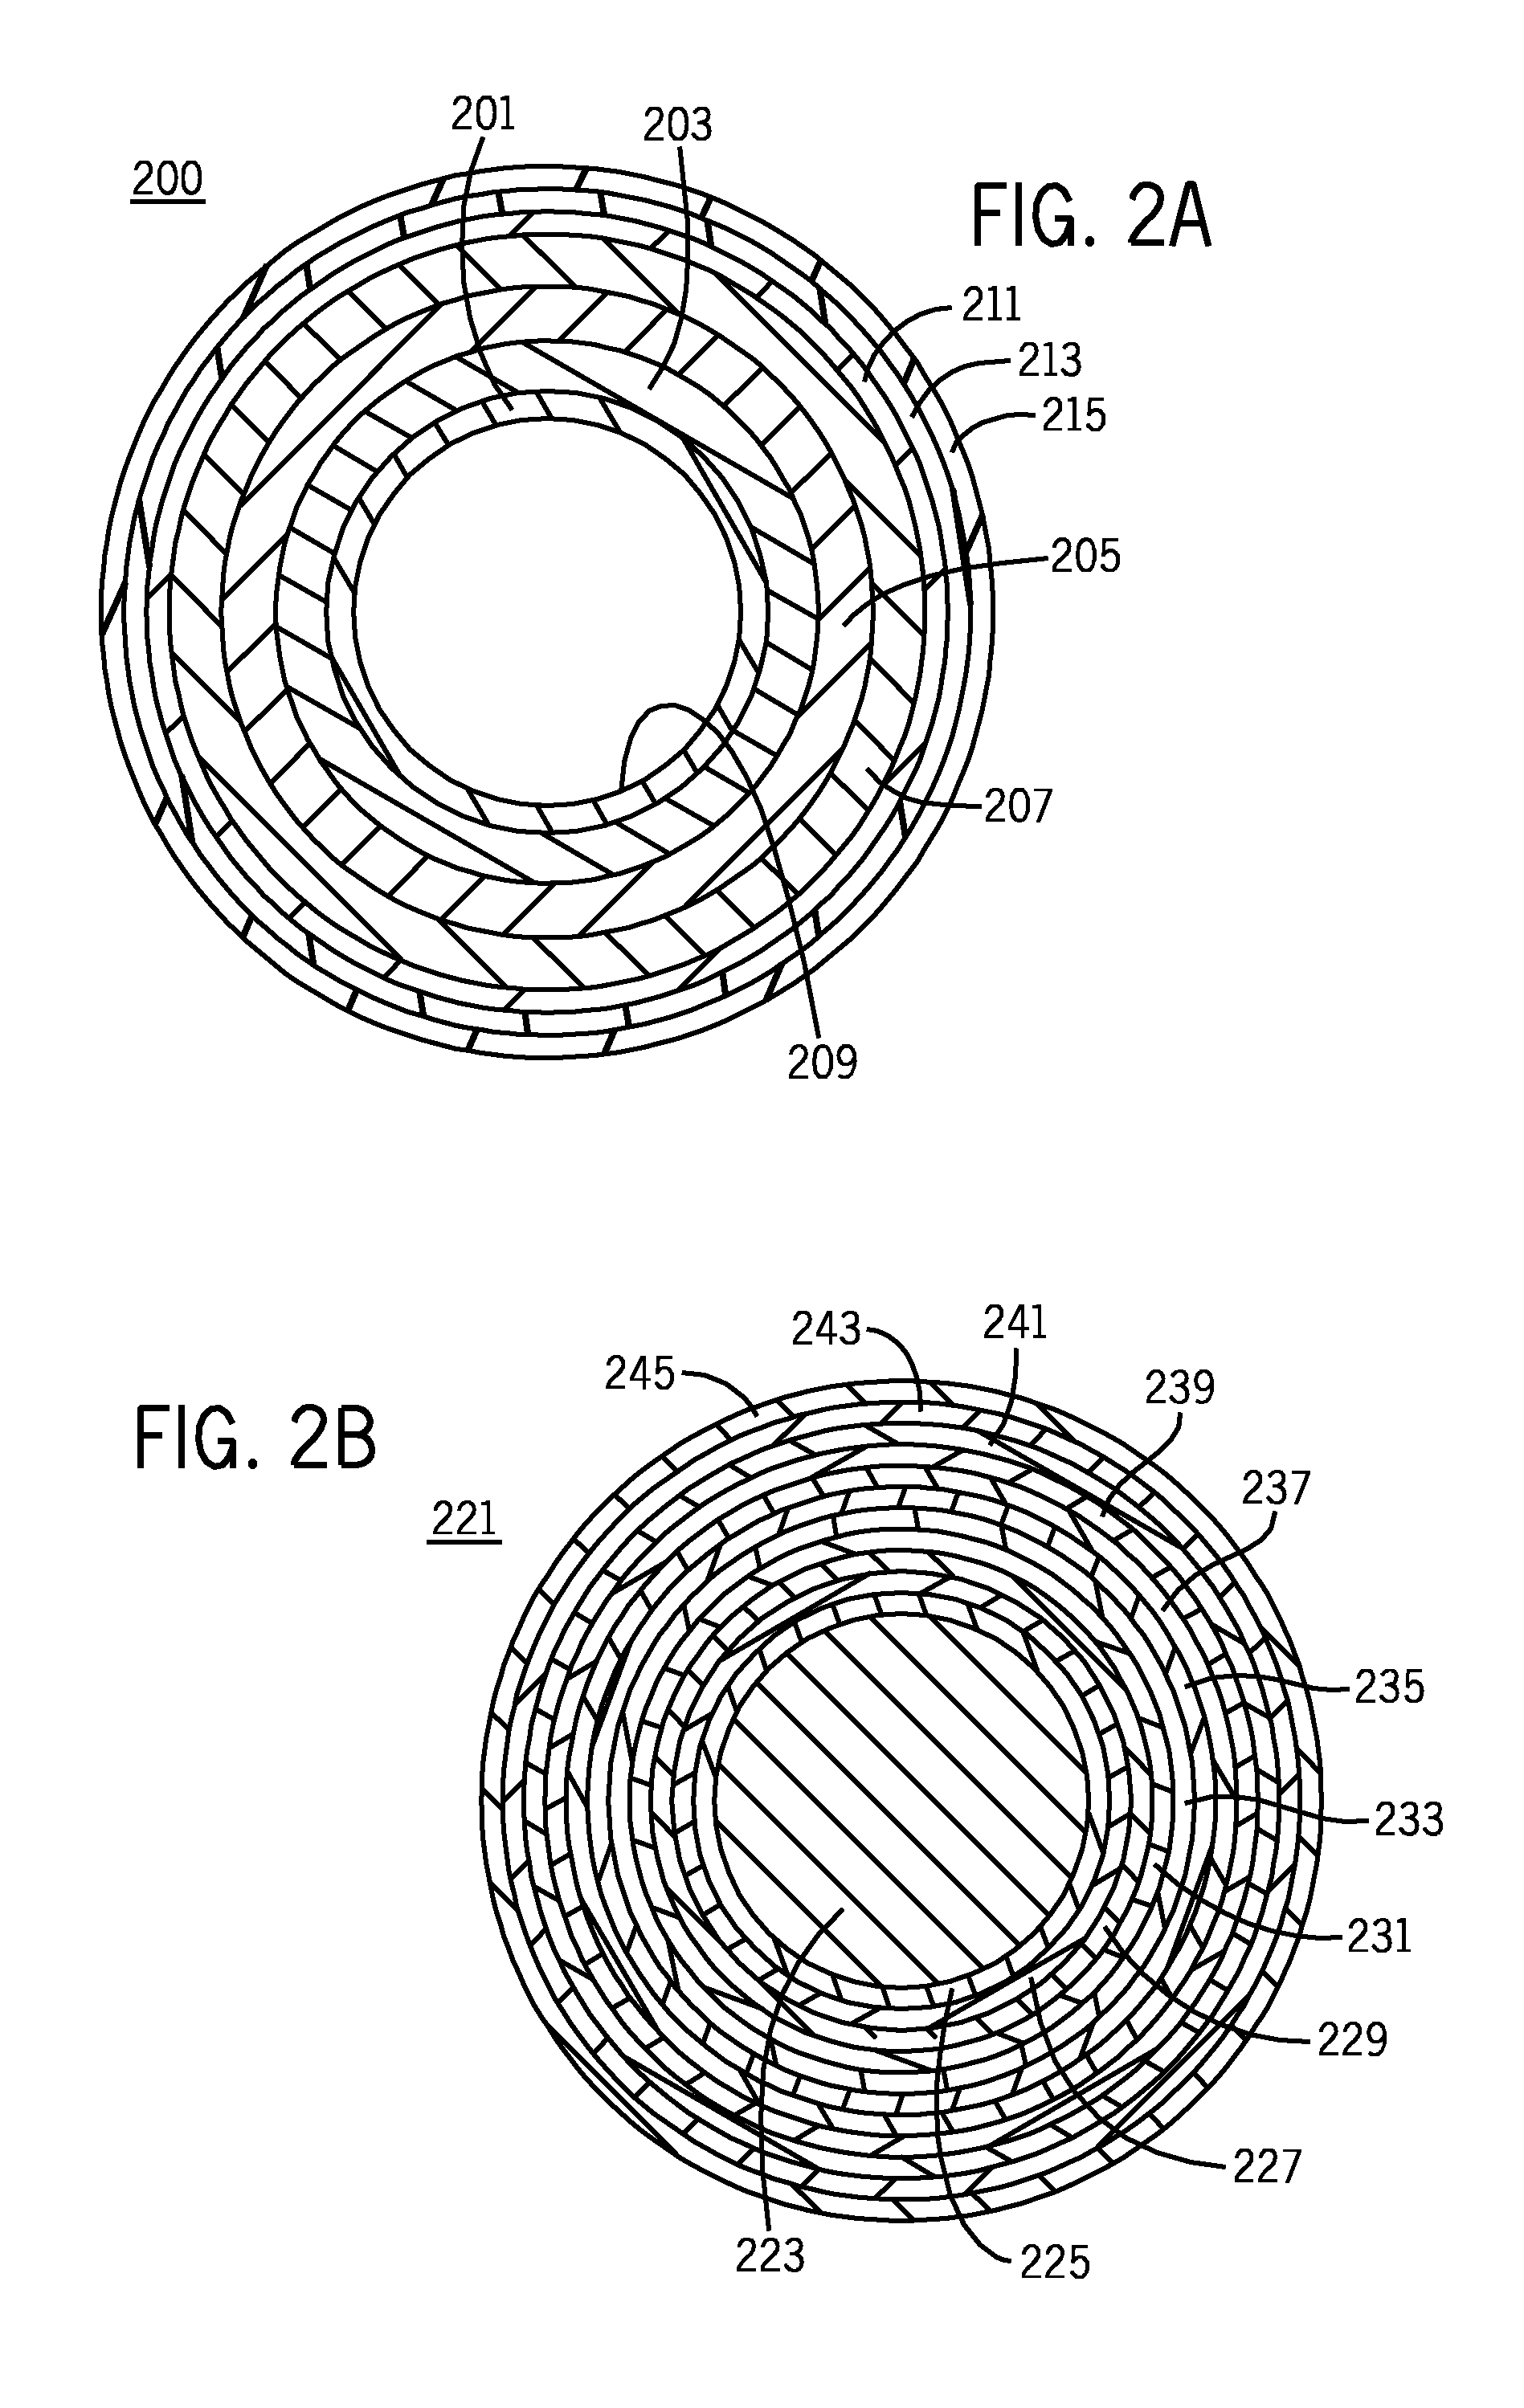 Method and apparatus for controlling the recharging of electric vehicles and detecting stolen vehicles and vehicular components